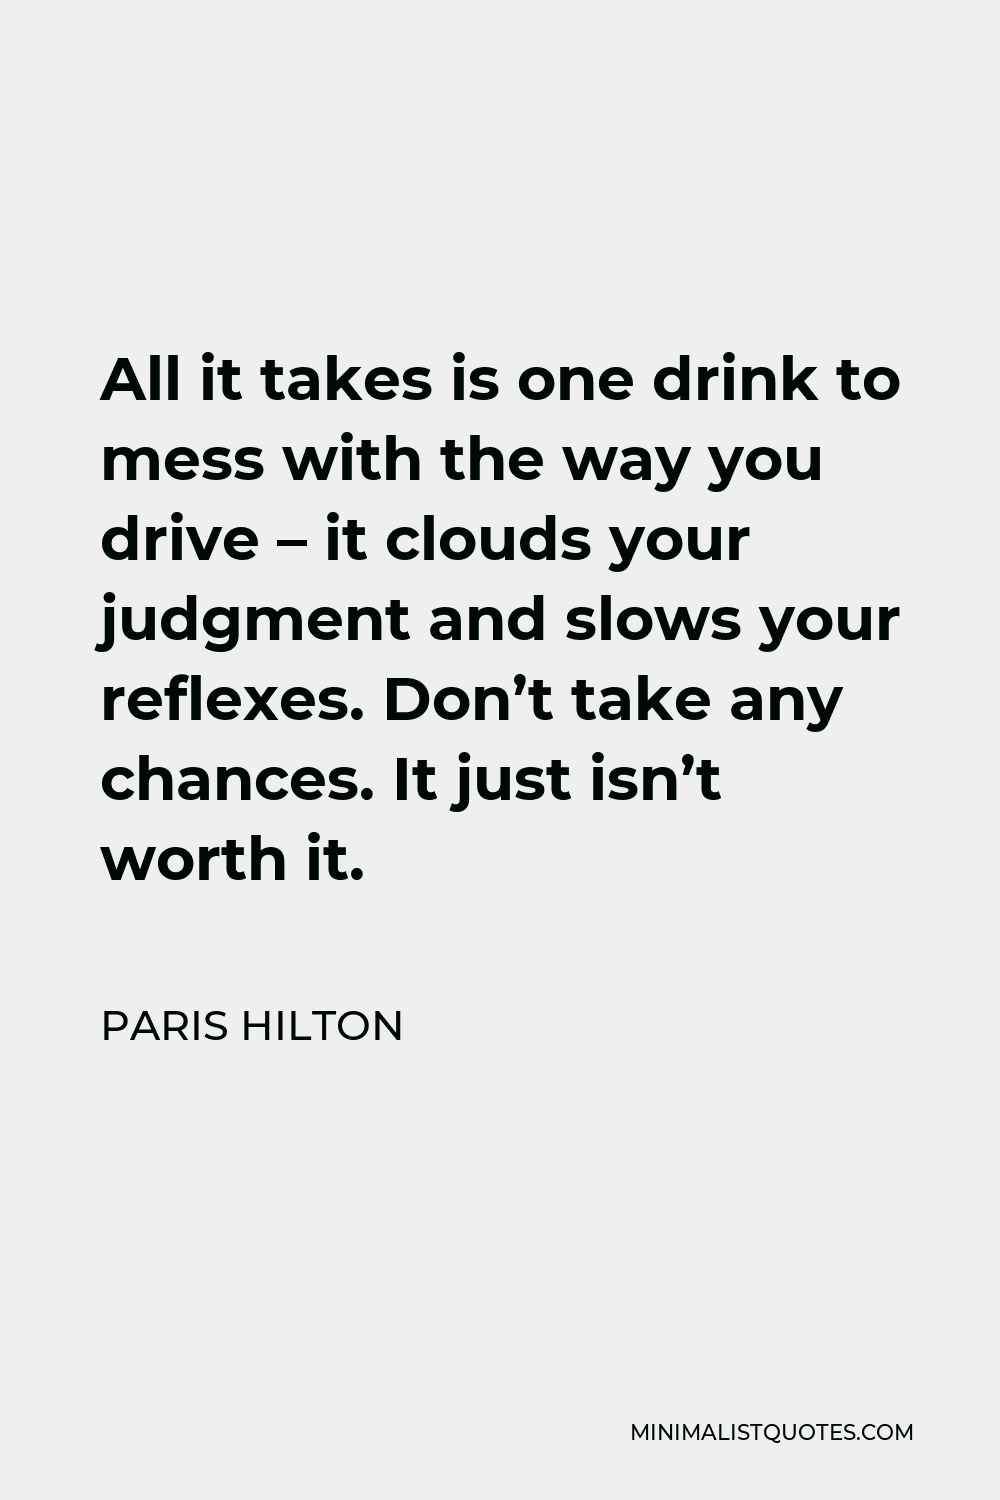 Paris Hilton Quote - All it takes is one drink to mess with the way you drive – it clouds your judgment and slows your reflexes. Don’t take any chances. It just isn’t worth it.